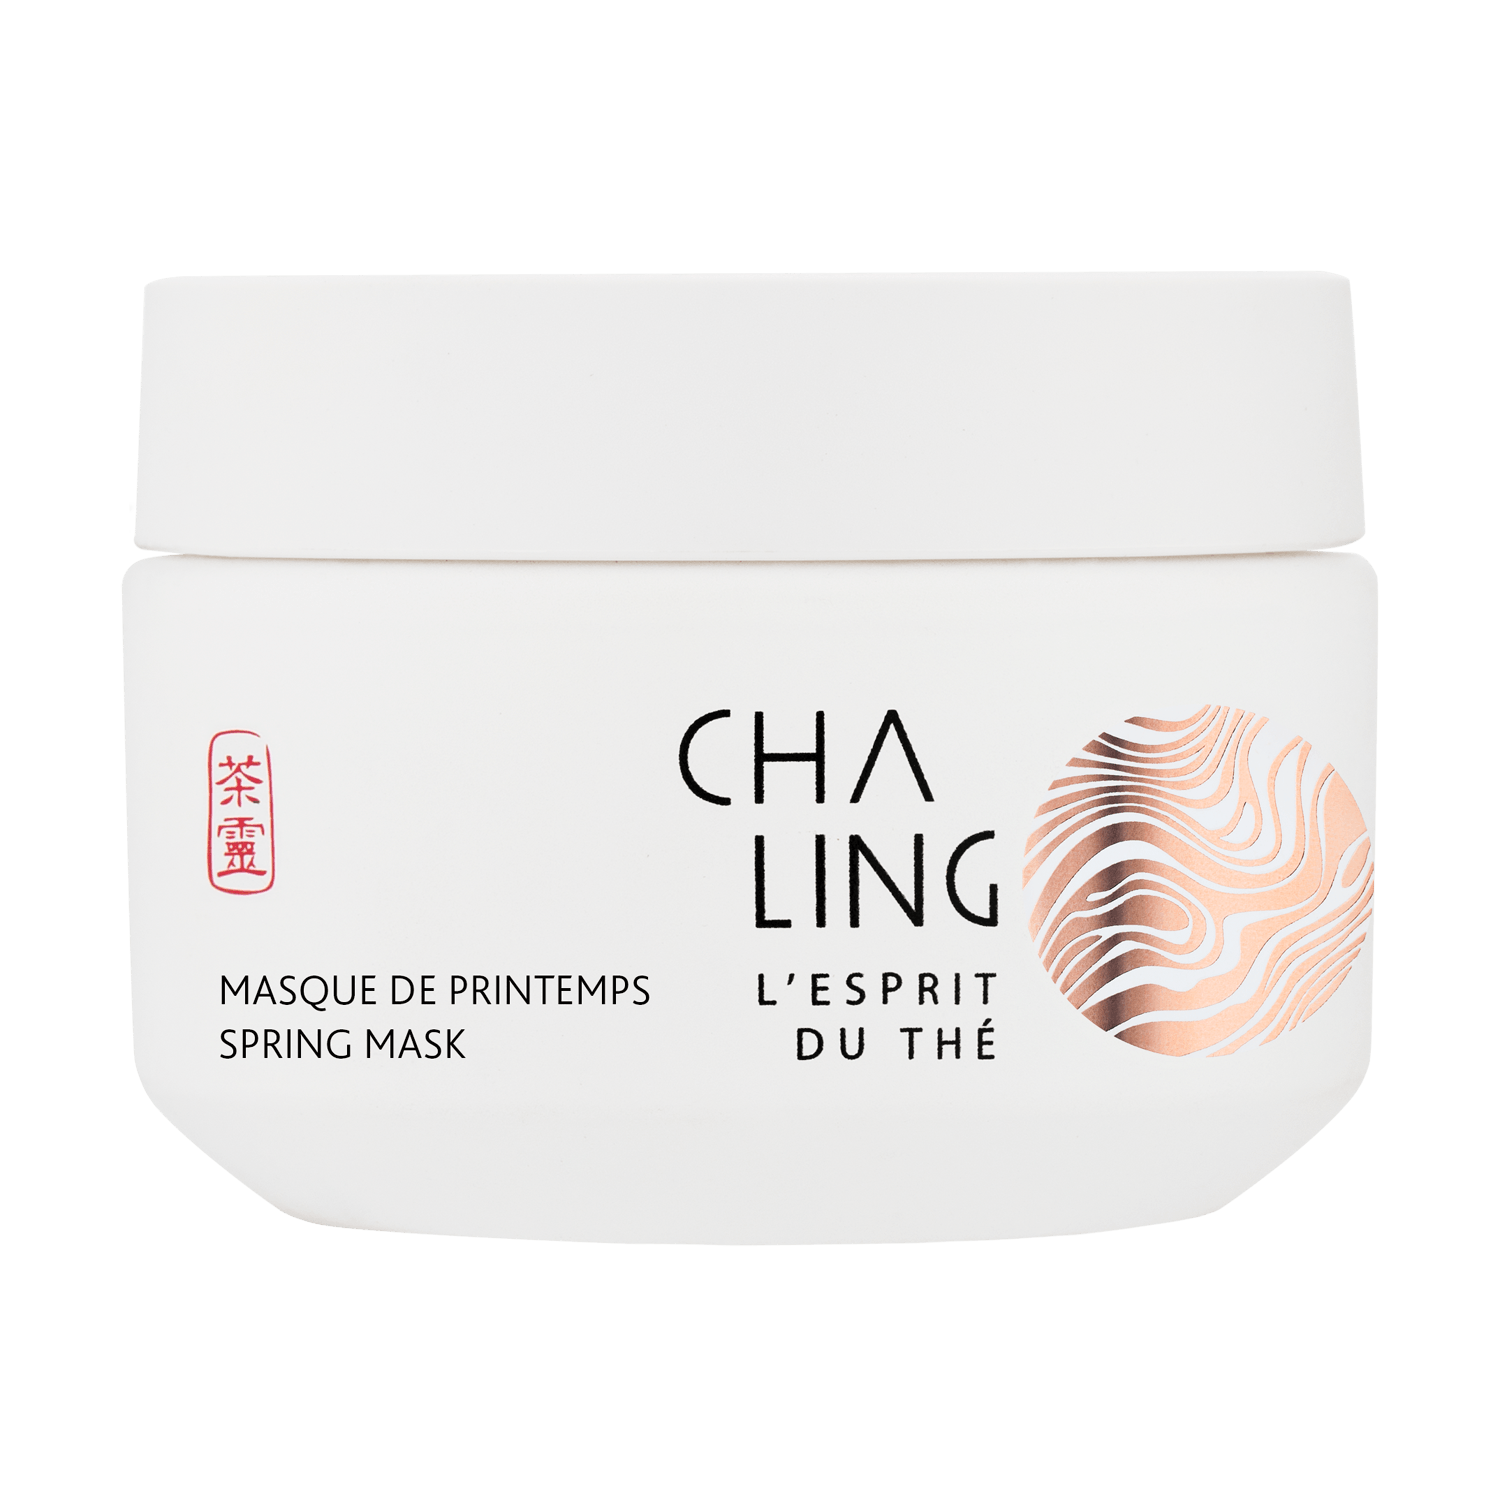 Can Cha Ling, a Local Beauty Brand Backed by LVMH, Succeed in China and  Beyond?